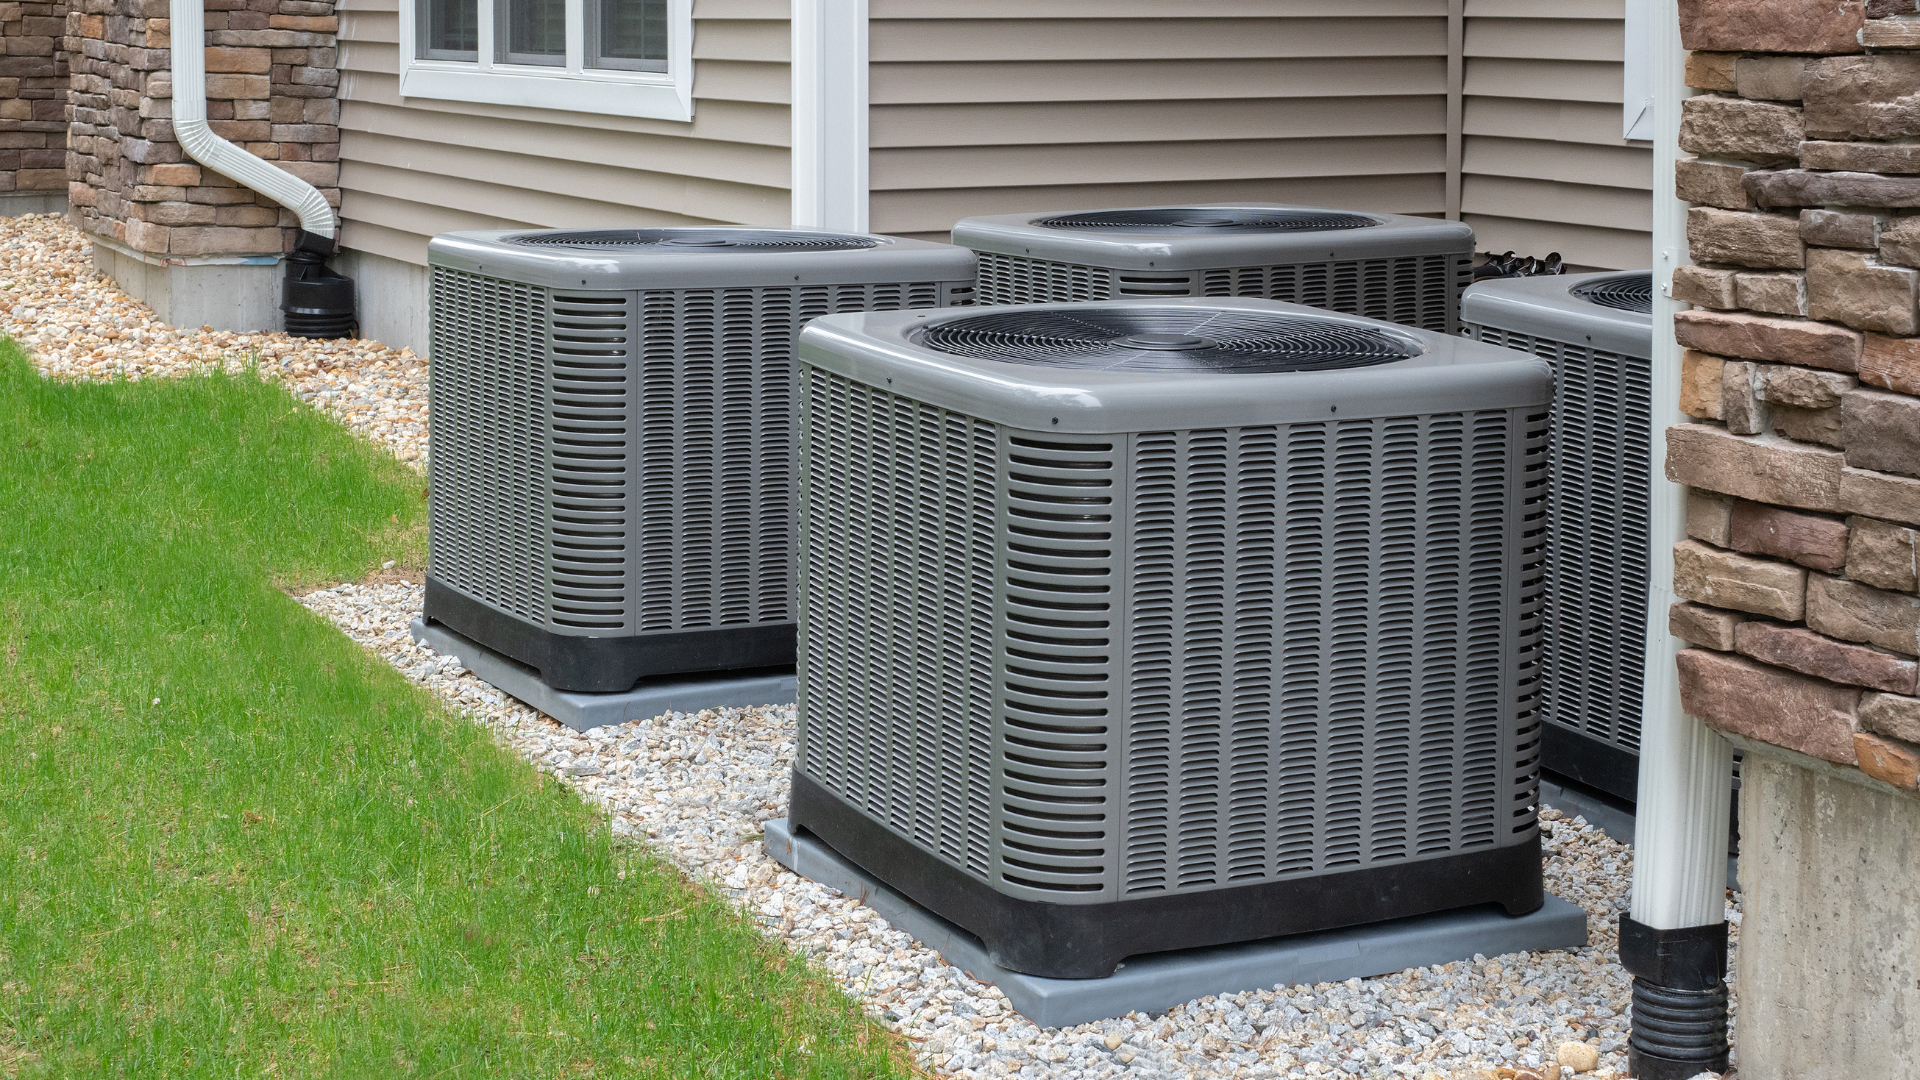 Geothermal Heat Pump Services in Charleston, SC from Fix-it 24/7 Air Conditioning, Plumbing & Heating